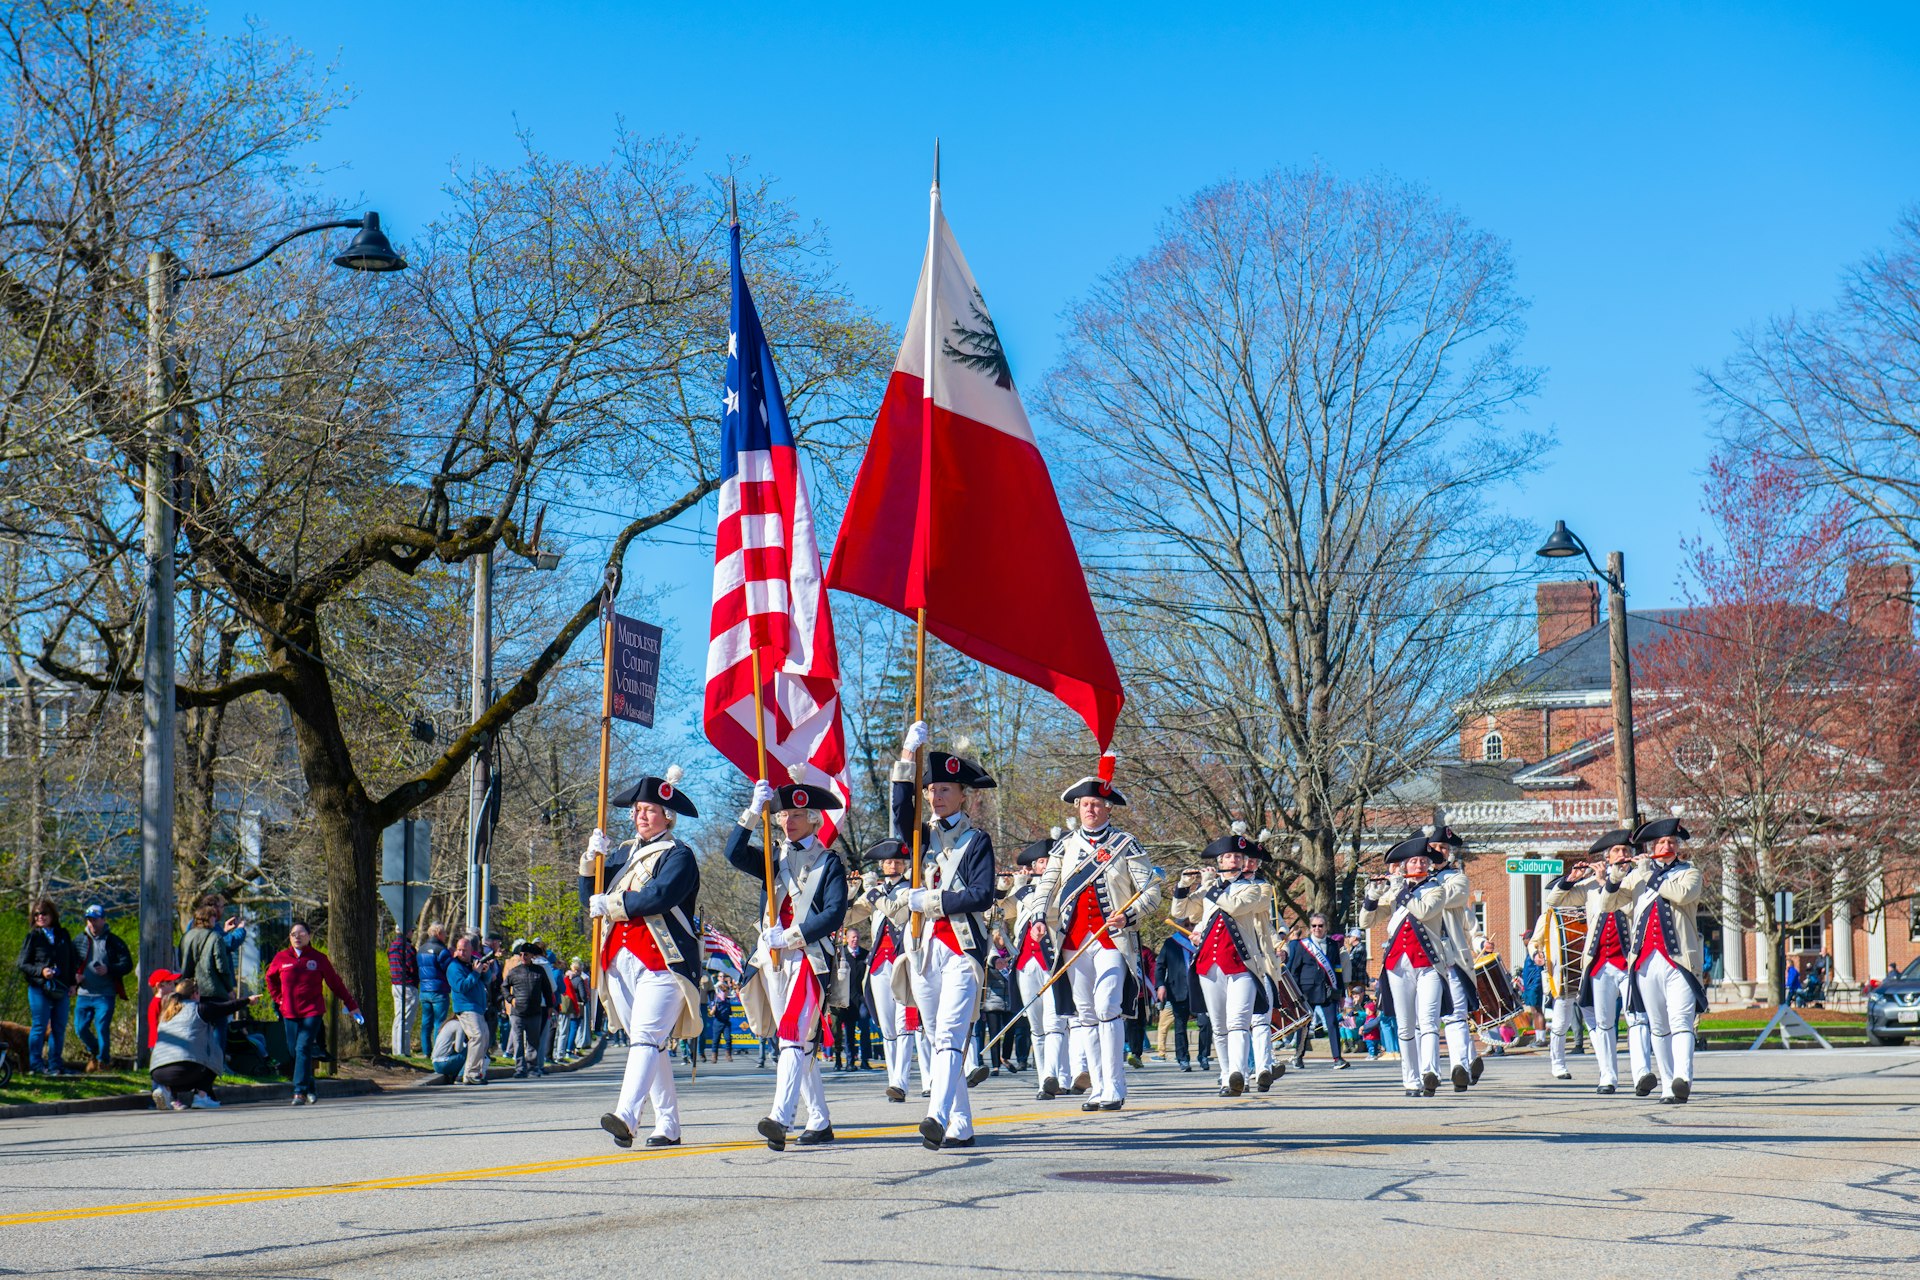 A Patriots' Day Parade in the town of Concord, Massachusetts